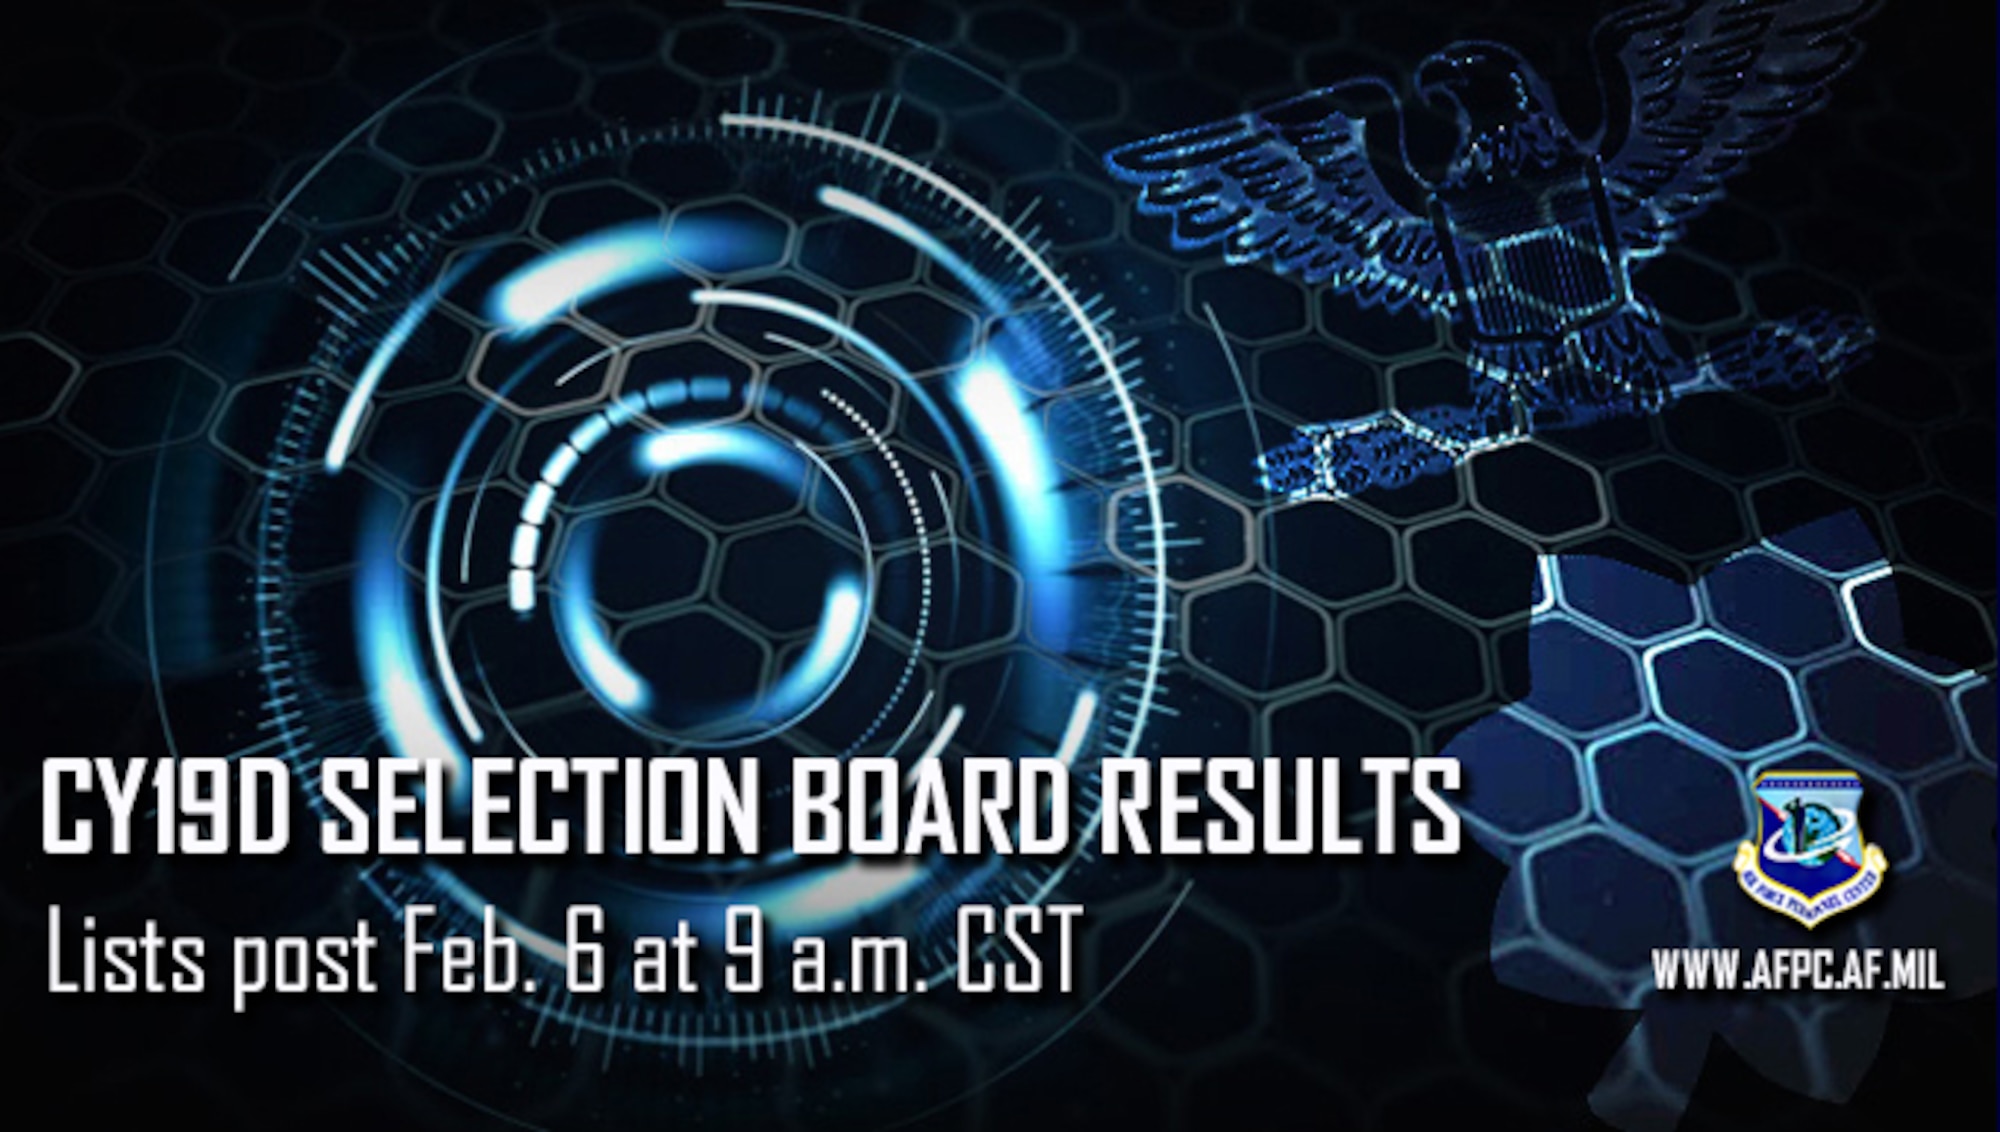 Blue graphic announcing the CY19D Selection board results will post Feb 6.